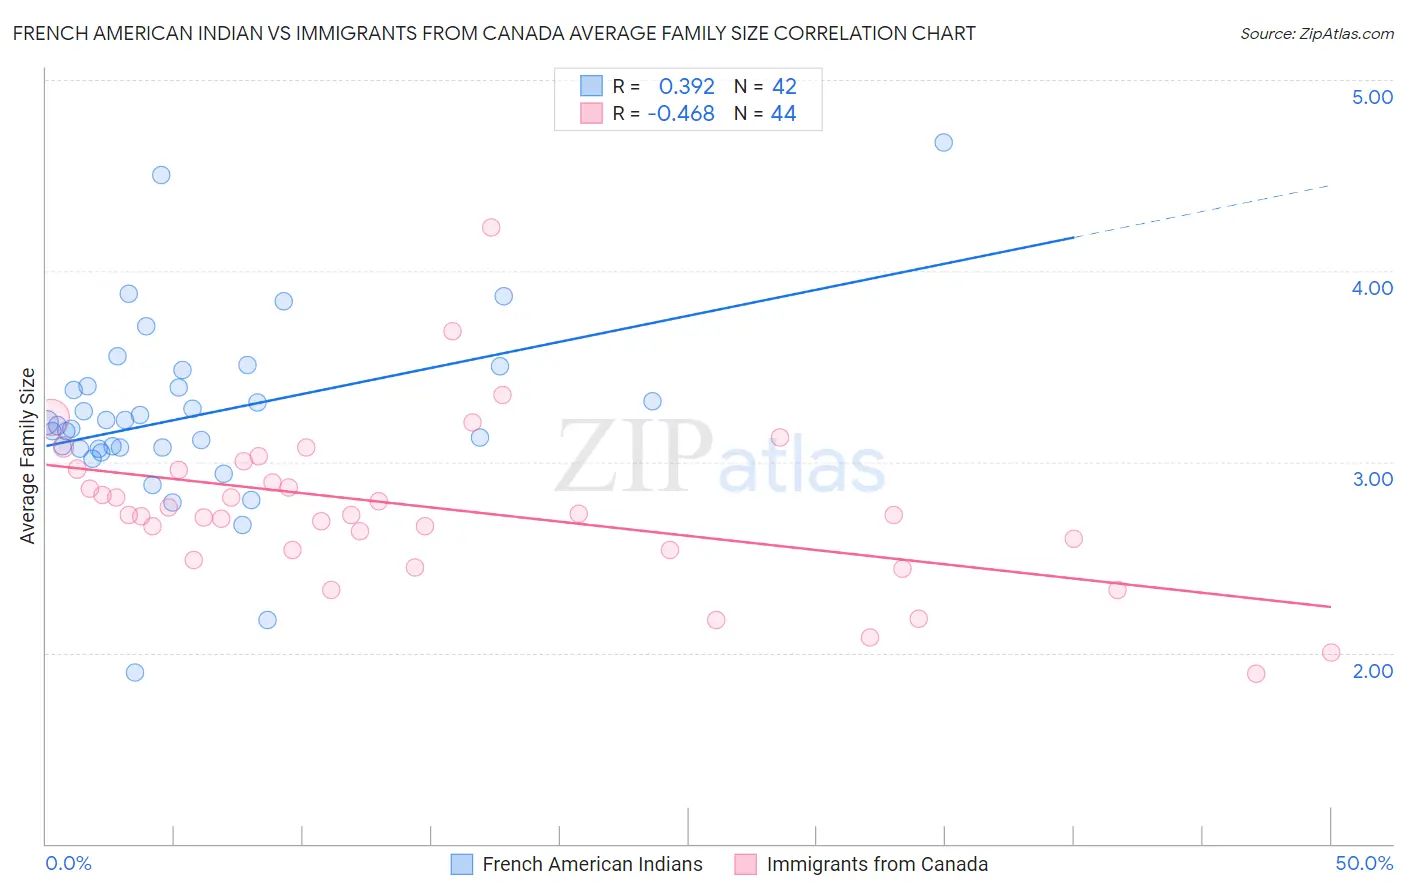 French American Indian vs Immigrants from Canada Average Family Size